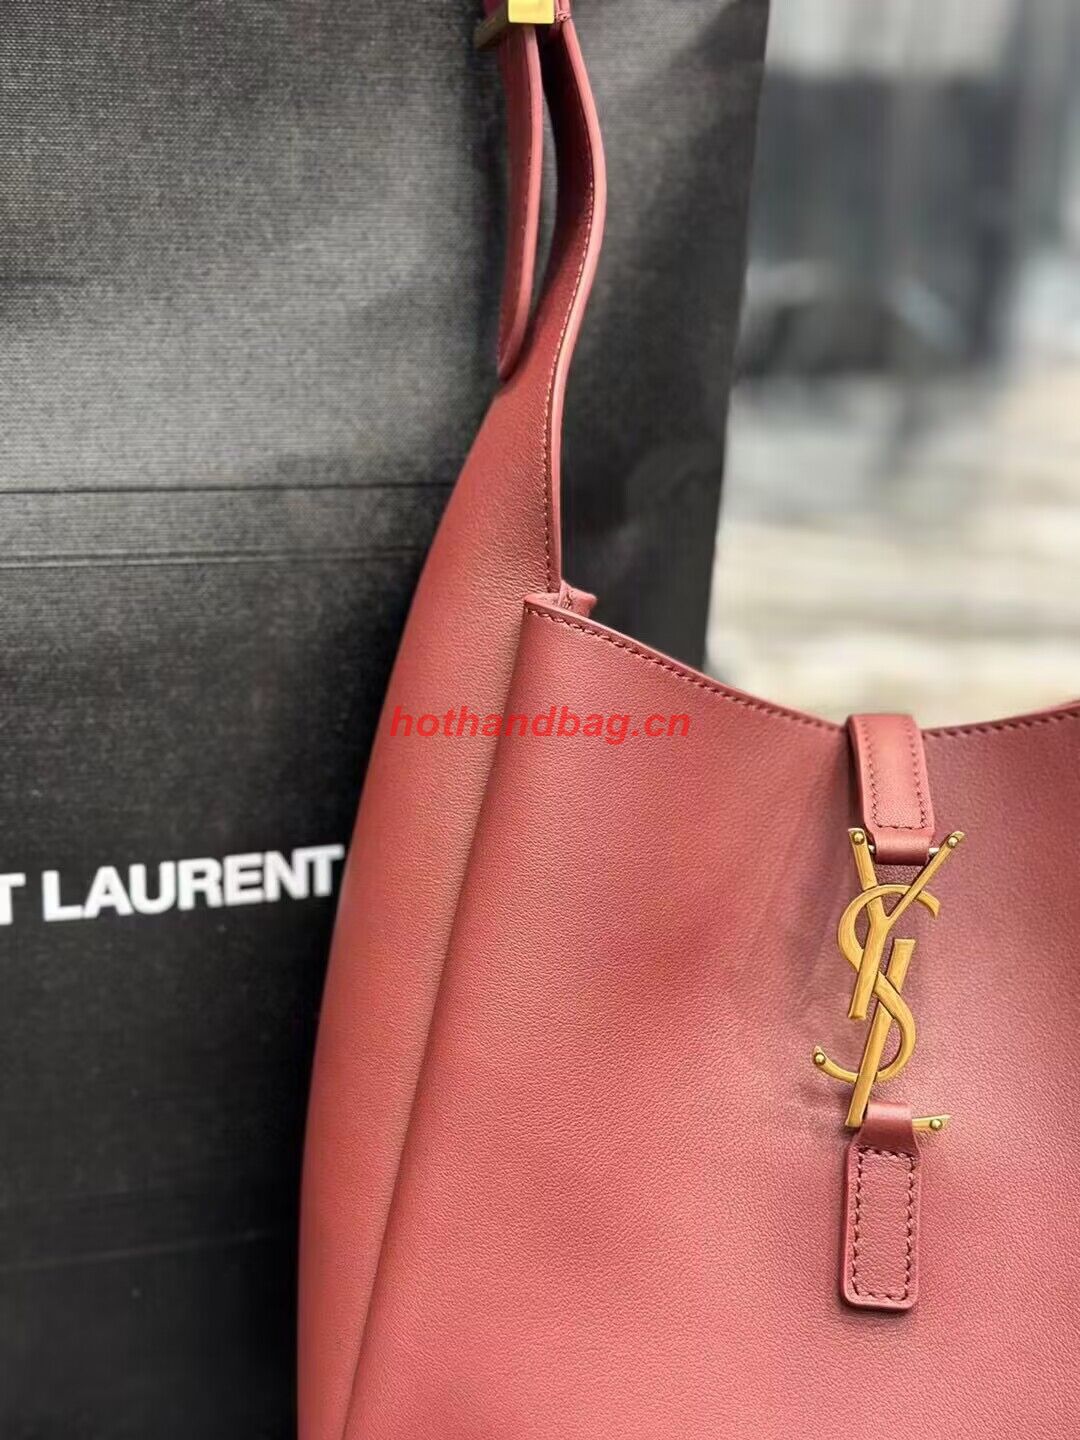 SAINT LAUREN LE 5 A 7 SOFT SMALL IN SMOOTH LEATHER 713938 ROUGE LEGION